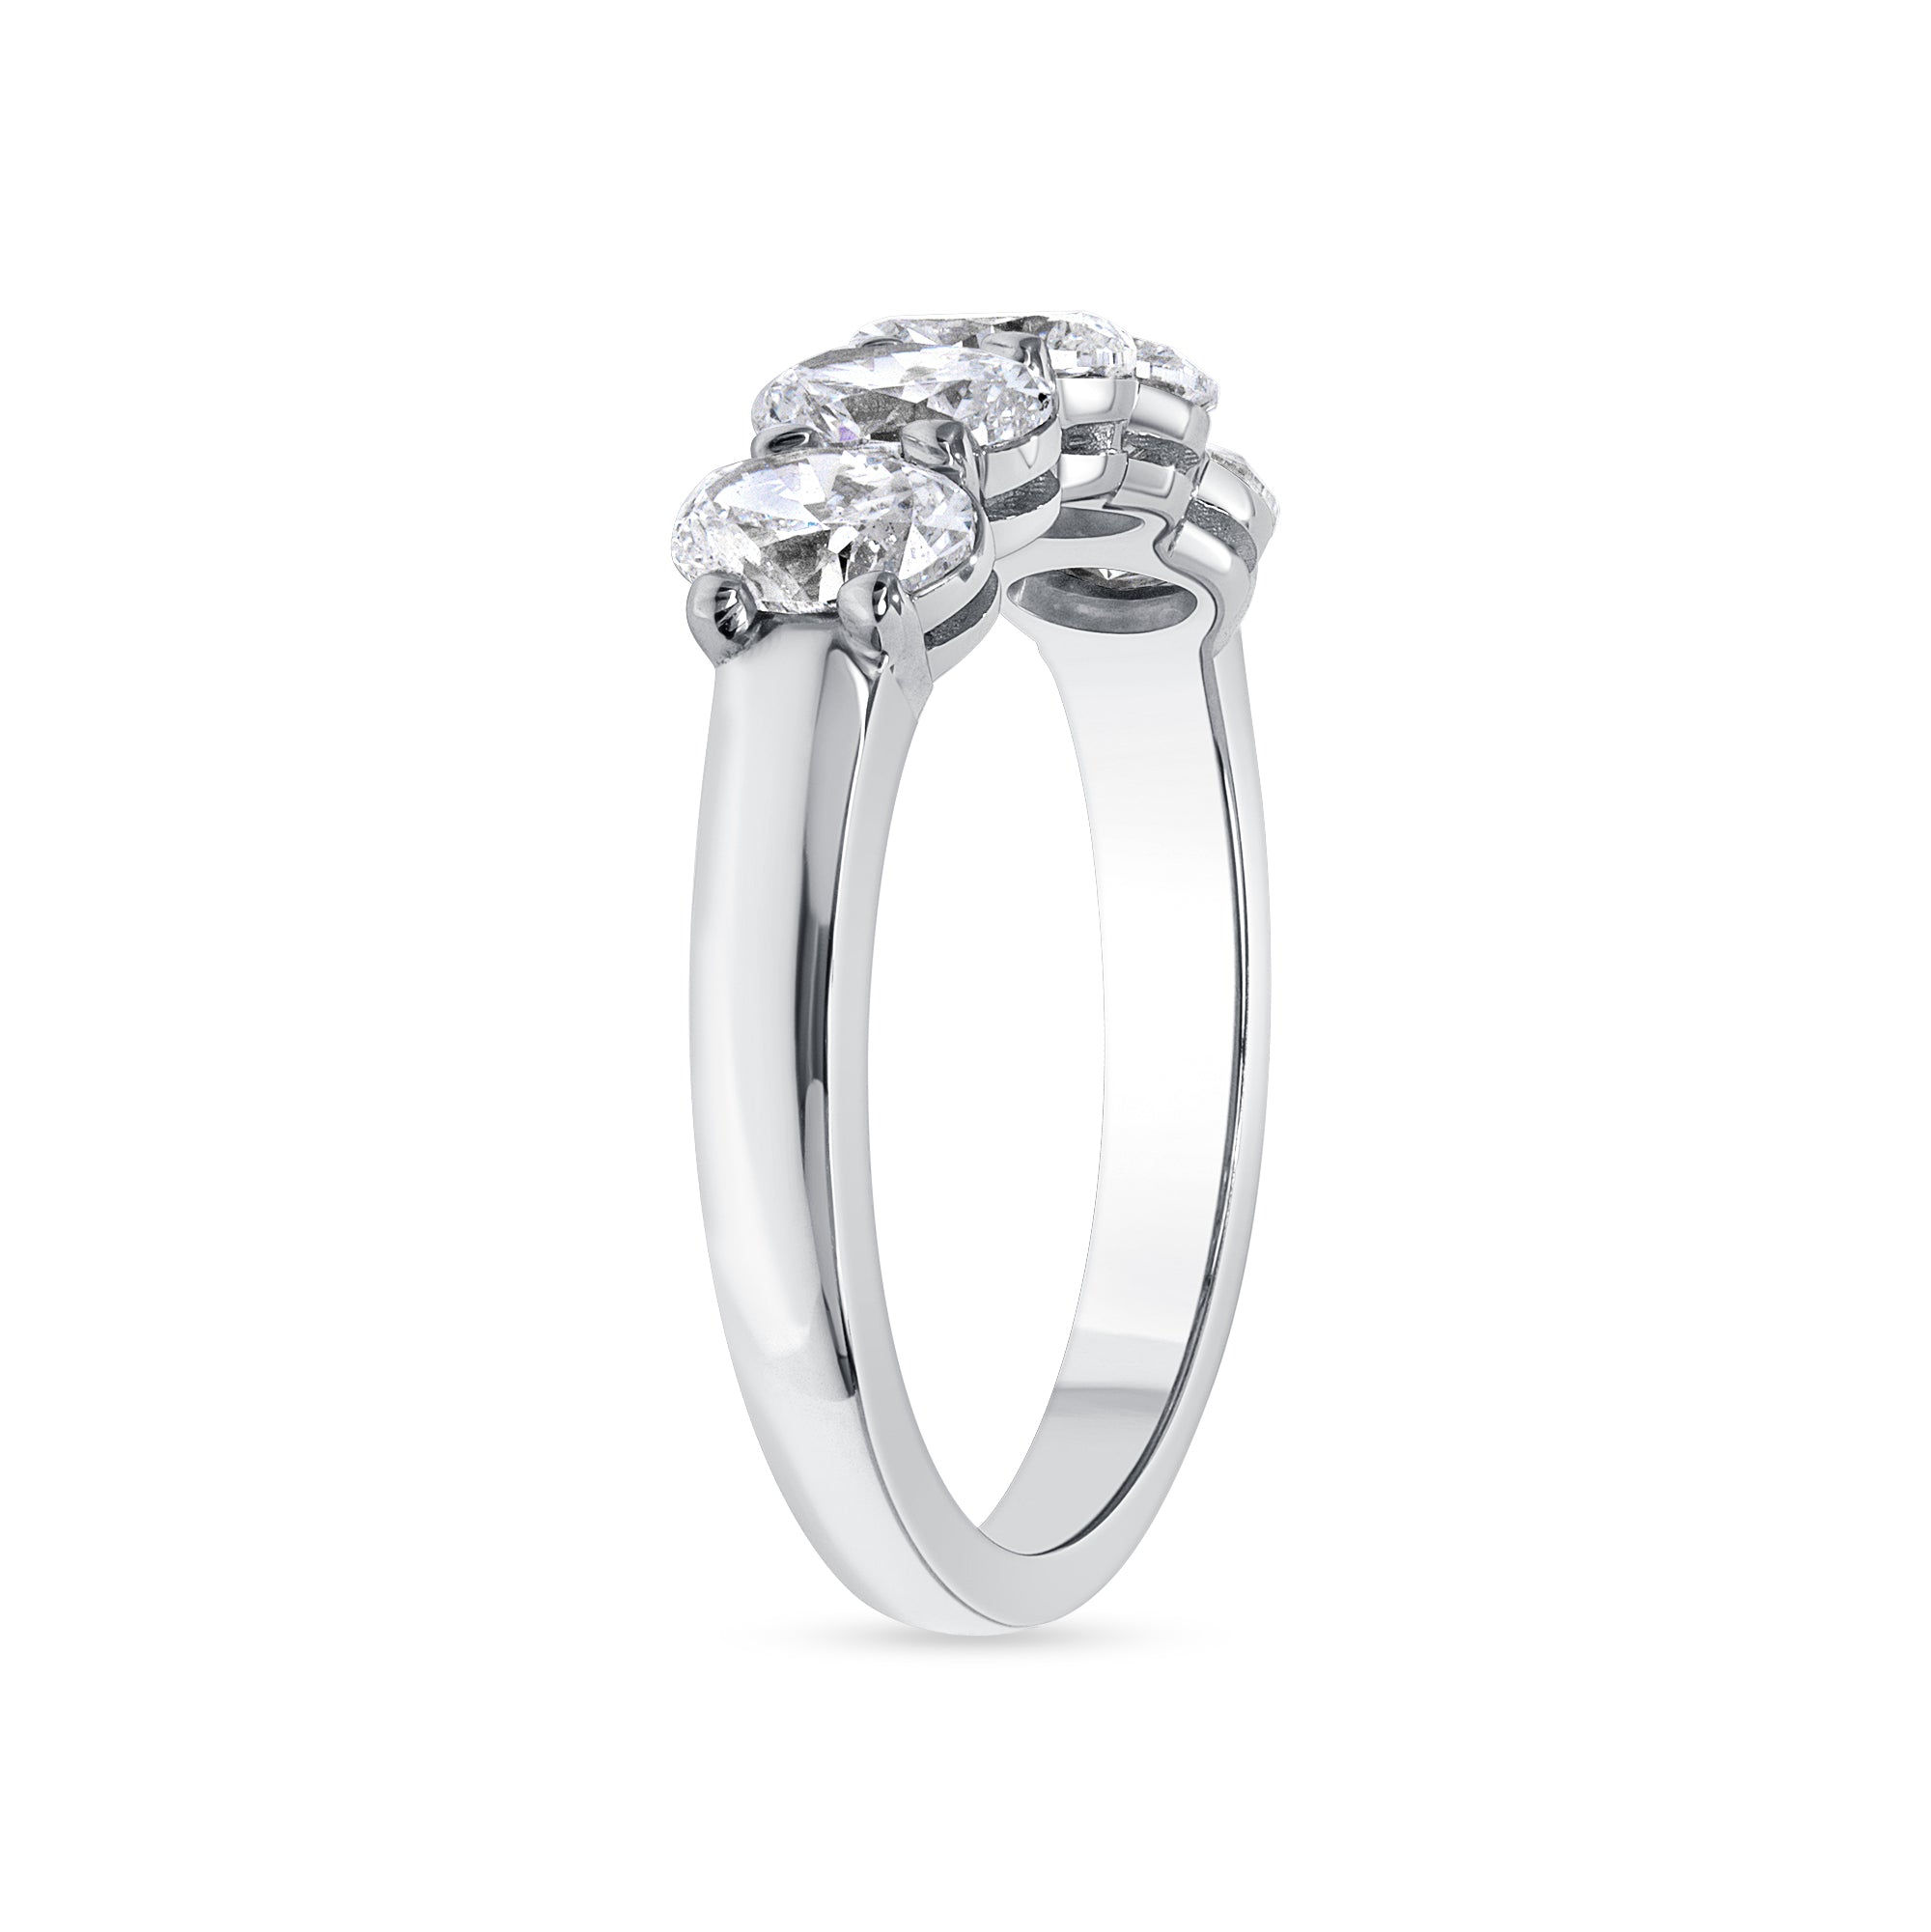 1.15 CT Oval Cut Diamond Five Stone Ring in 18K White Gold